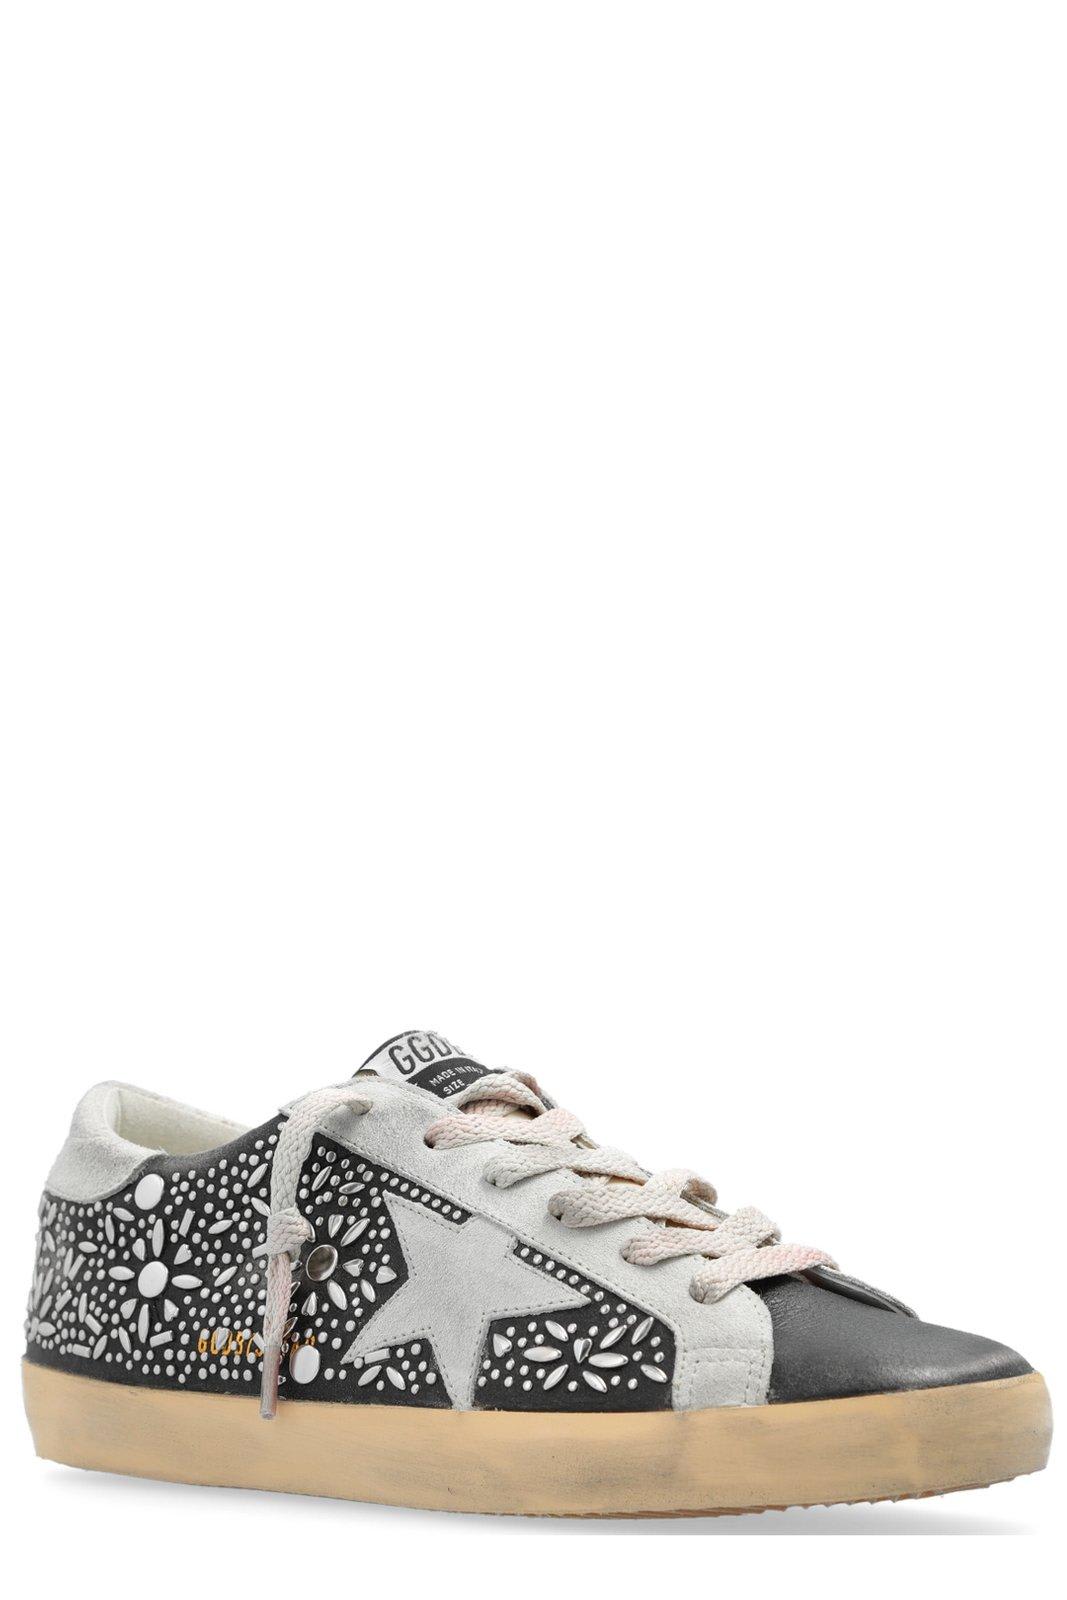 Shop Golden Goose Ball Star Embellished Sneakers In Black/ice